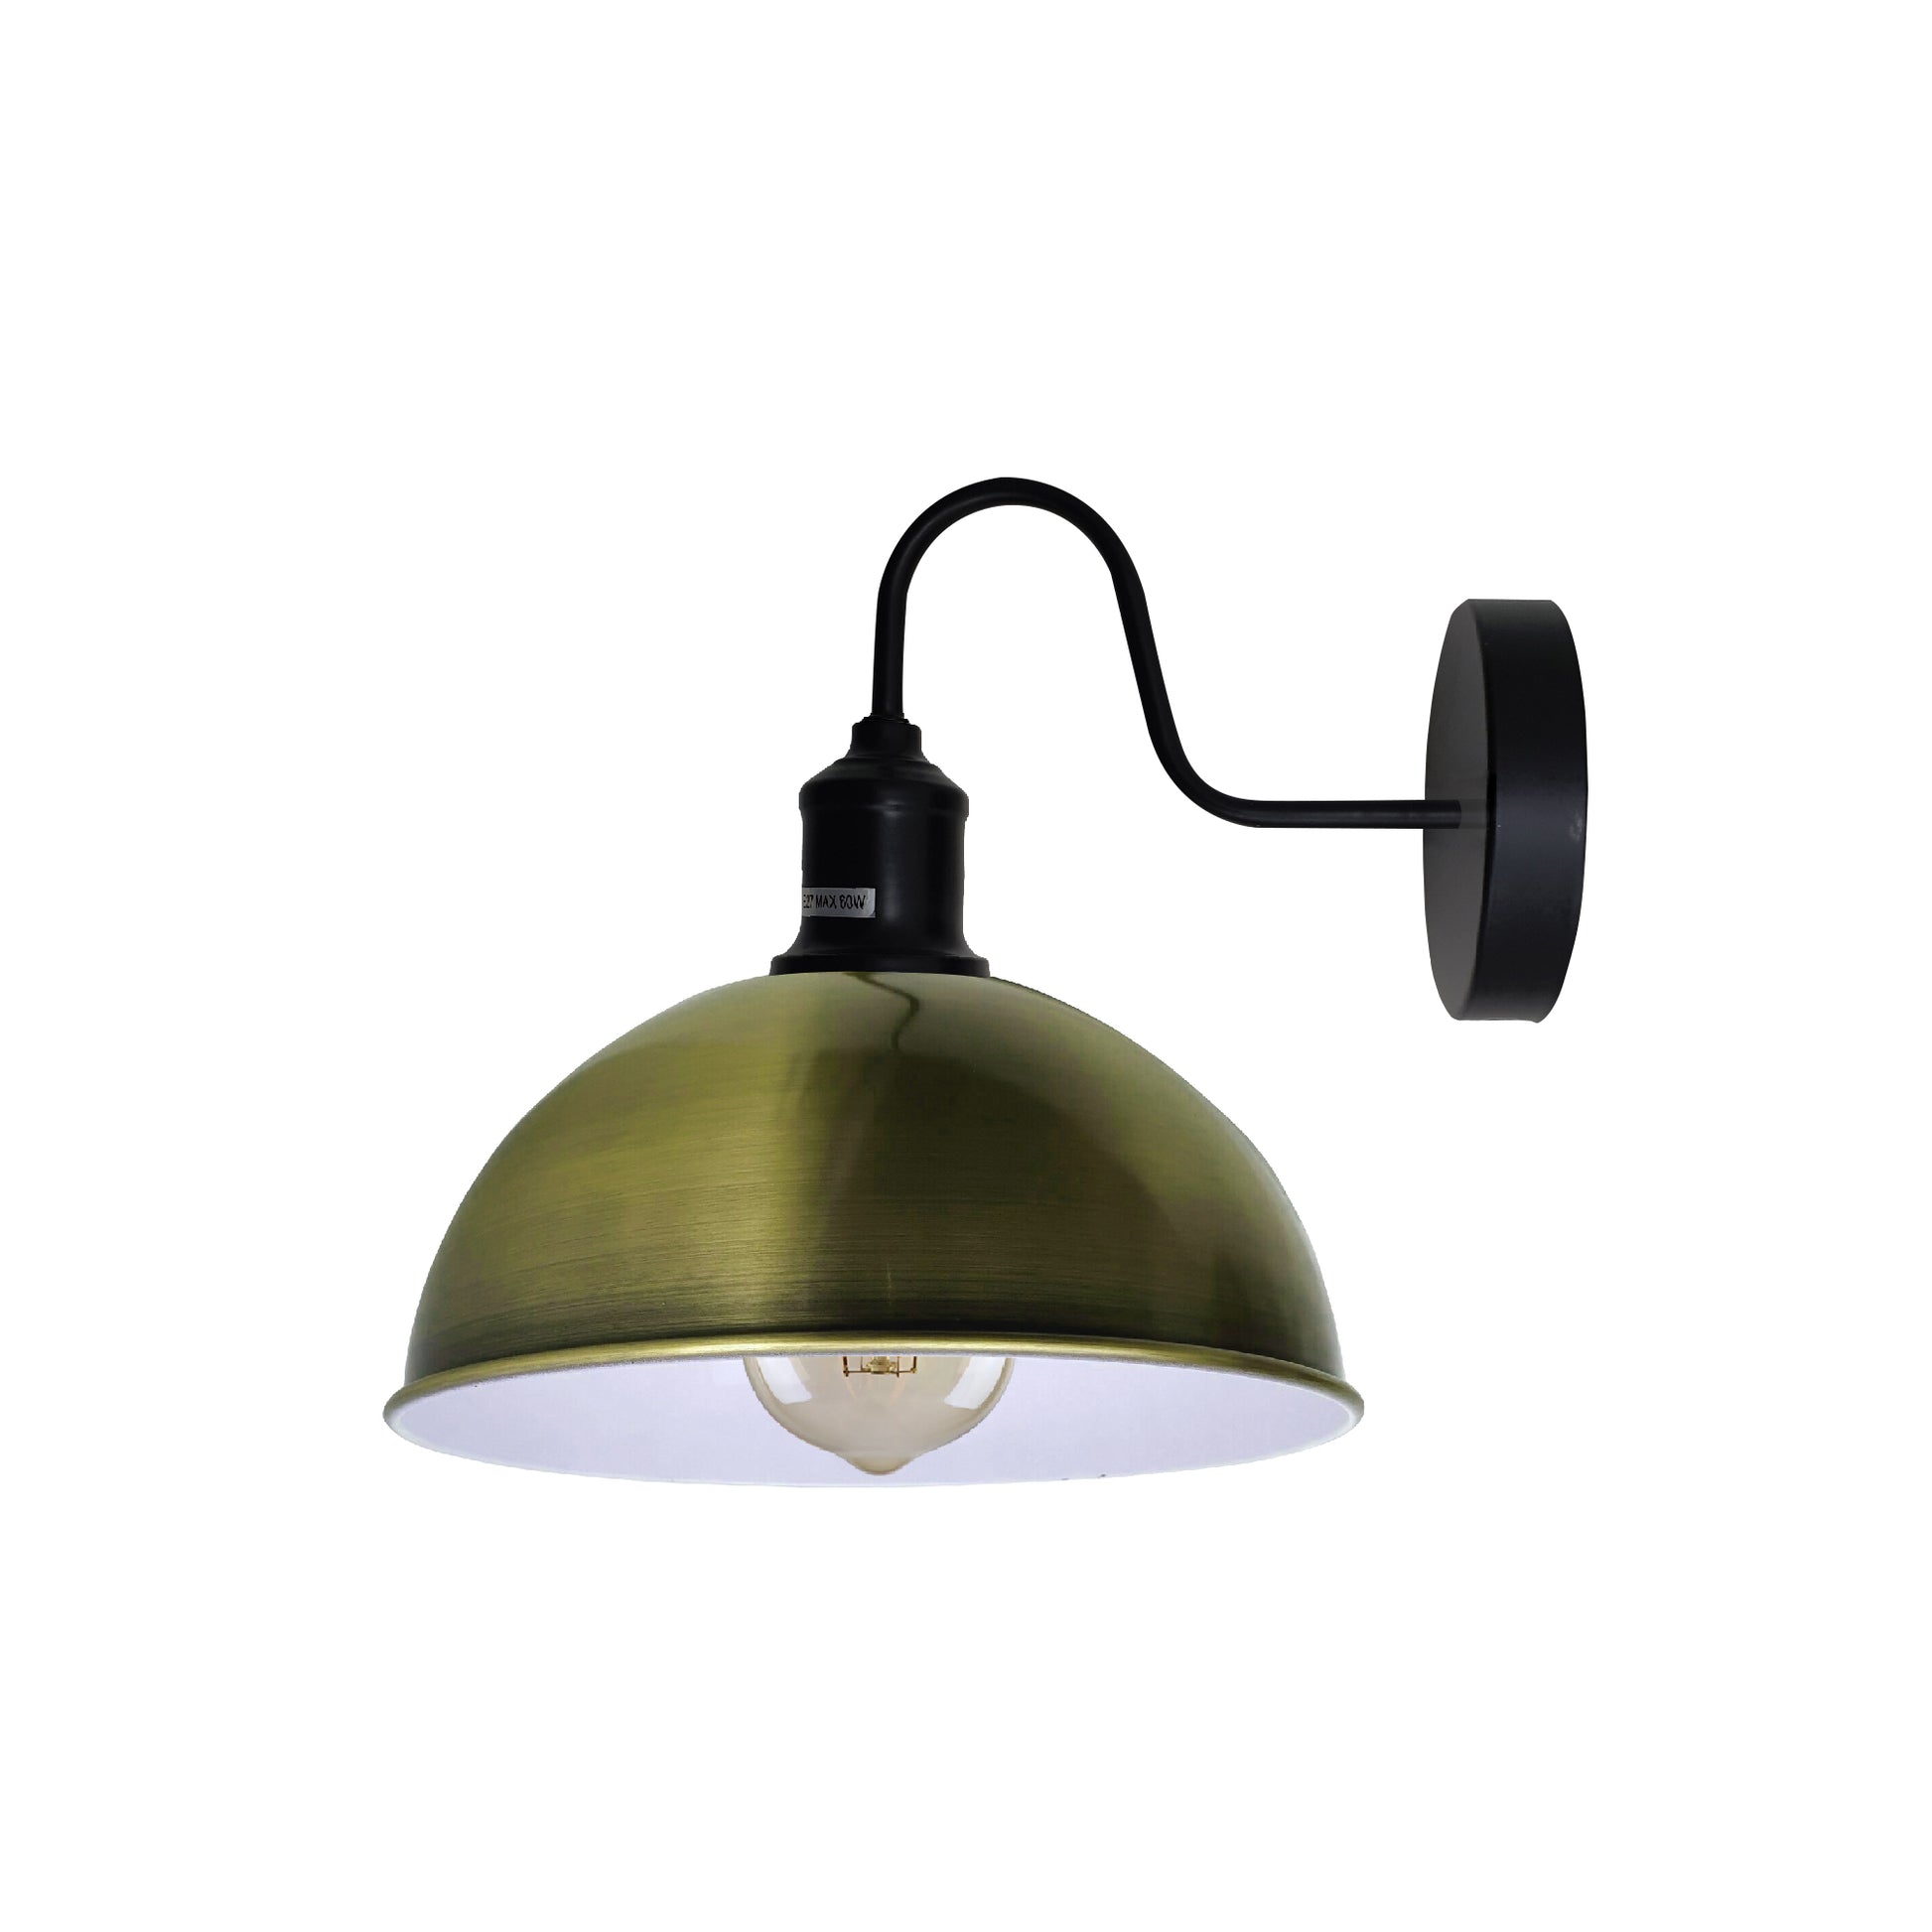 Brushed brass wall sconce lamp